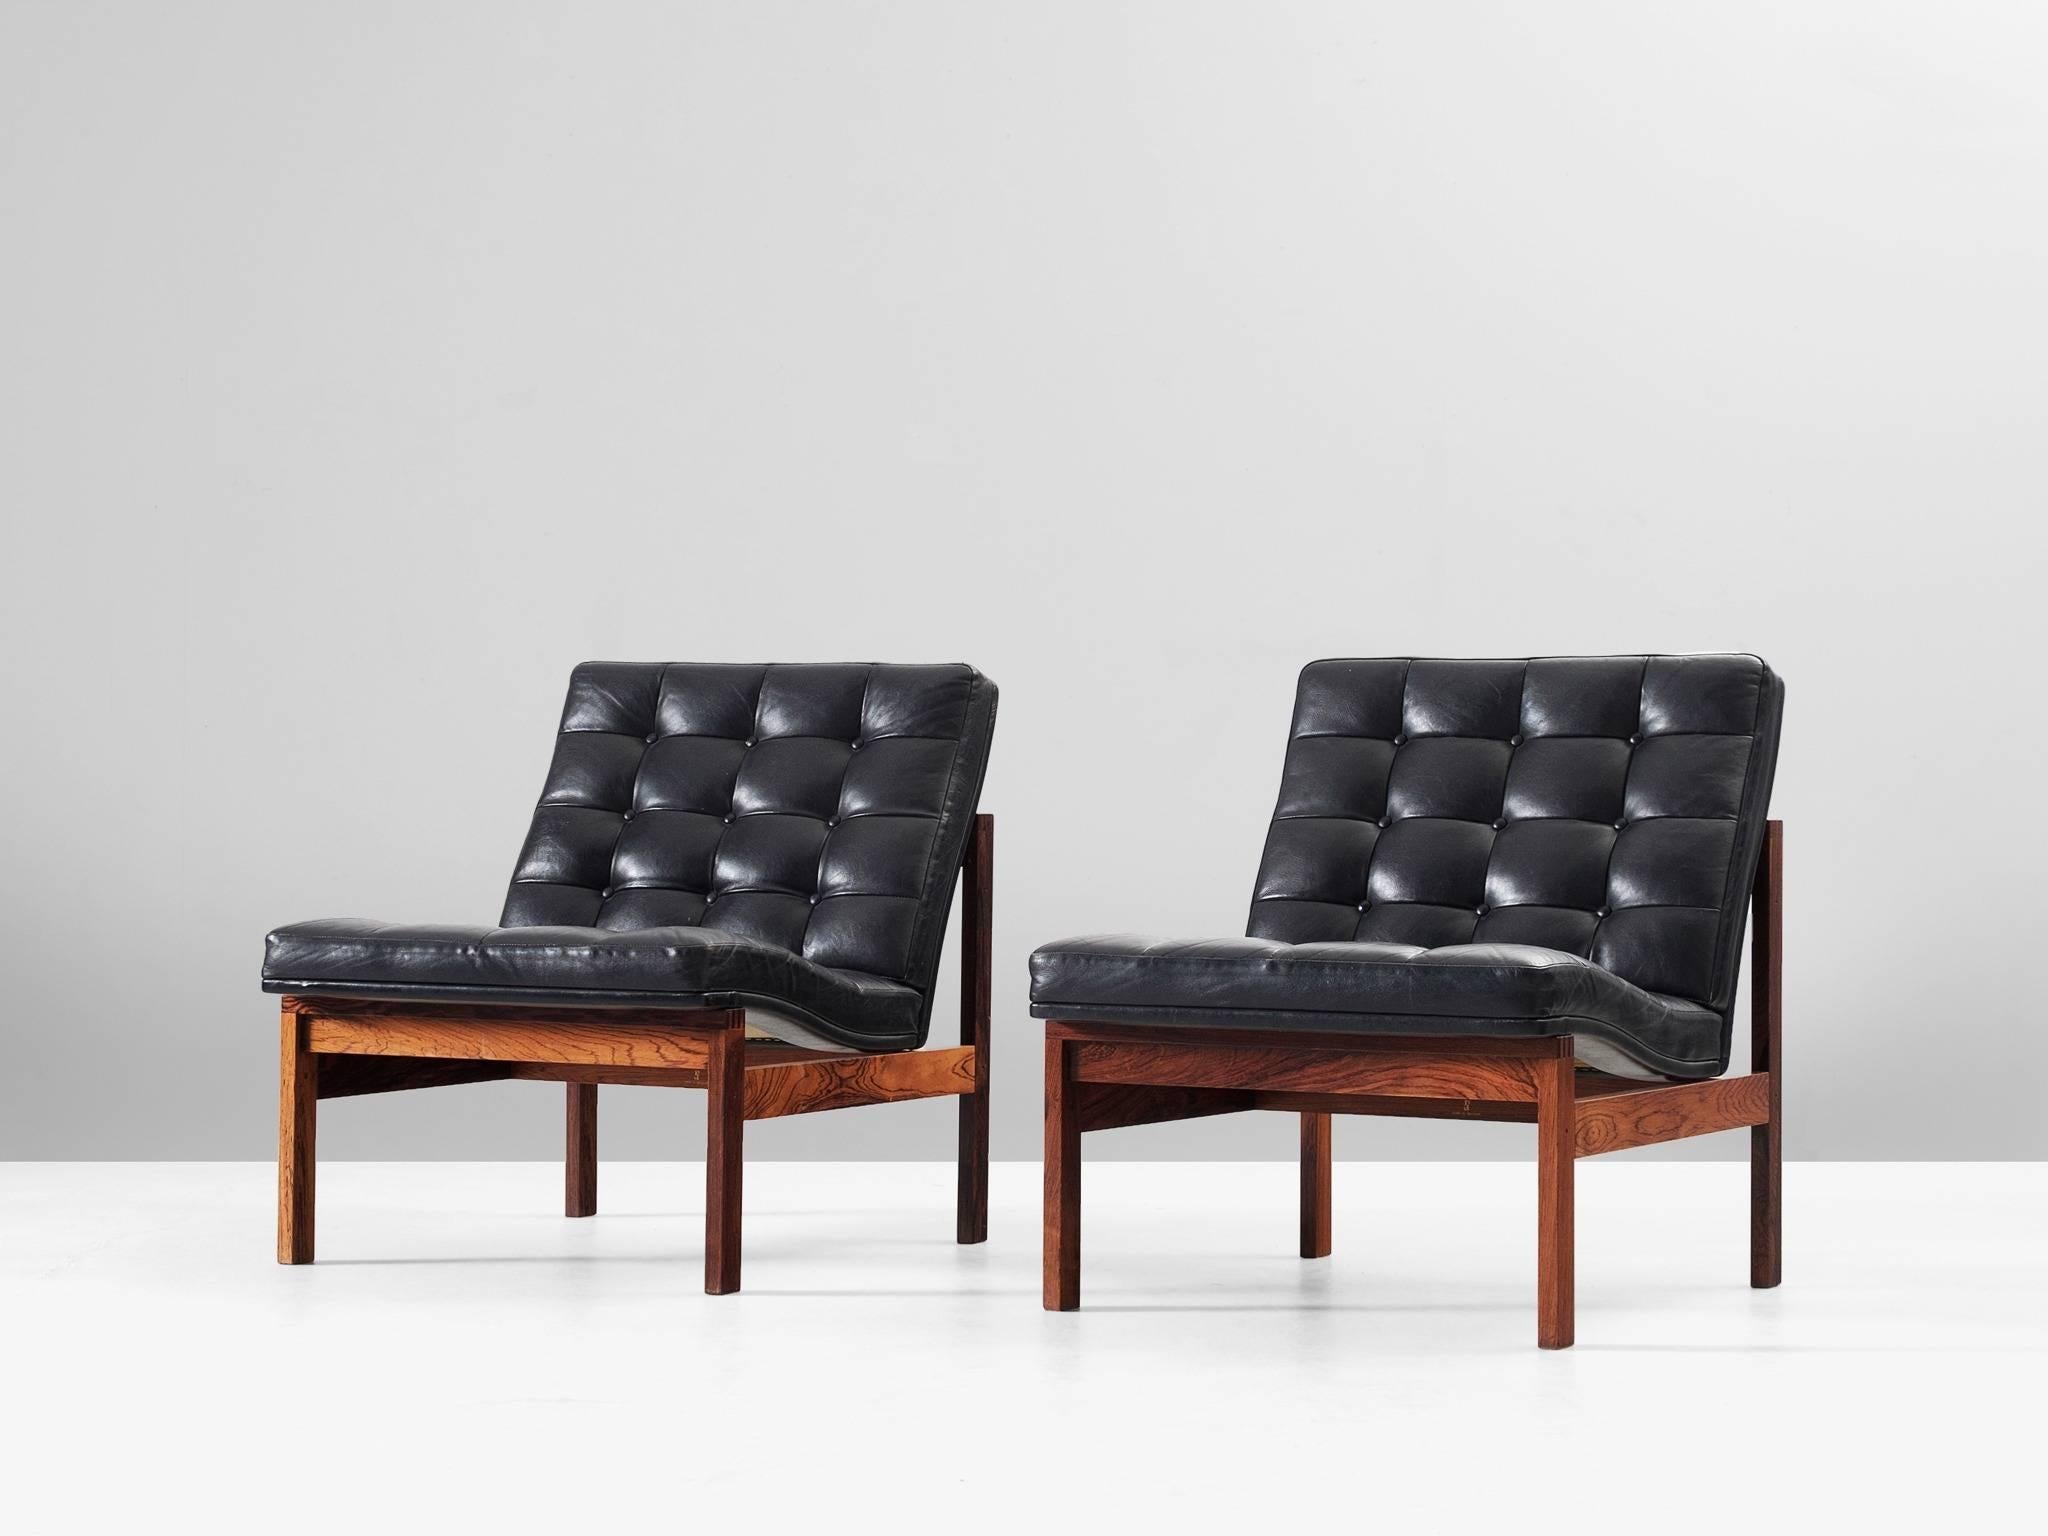 Pair of easy chairs, in rosewood and leather, by Ole Gjerløv-Knudsen & Torben Lind for France & Søn, Denmark, 1962.

Modern set of easy chairs. These chairs have a tight and simple design. With a frame of rosewood and L-shaped seating. The